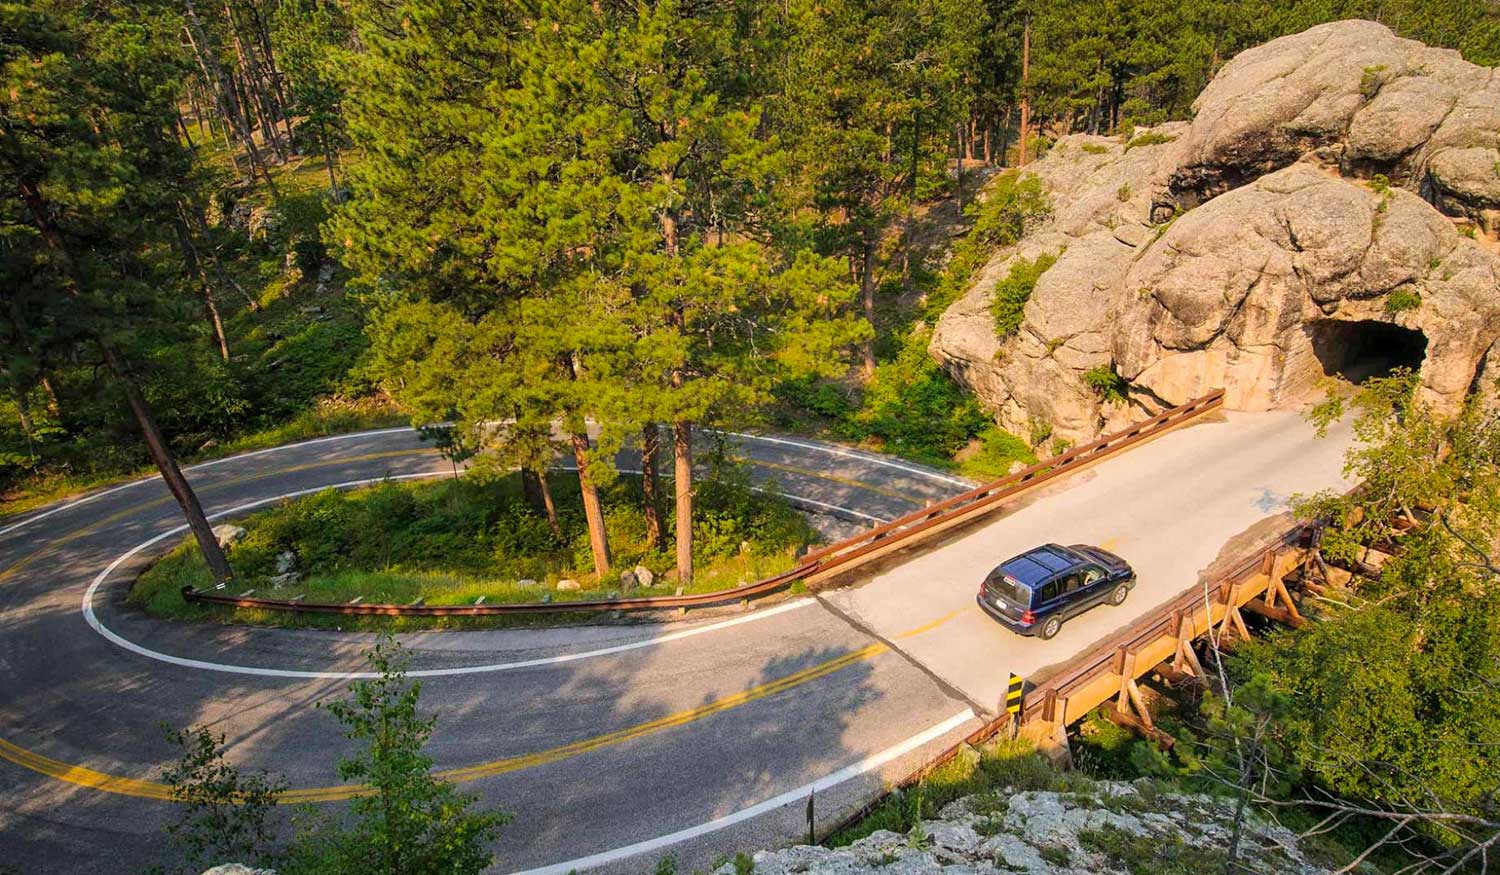 Switchback roads can be very stressful to drive on, especially when you're not used to them or don't know what lies ahead. This is a great parallel with the winding road our spiritual lives can take. Are we seeking Jesus to straighten our paths?